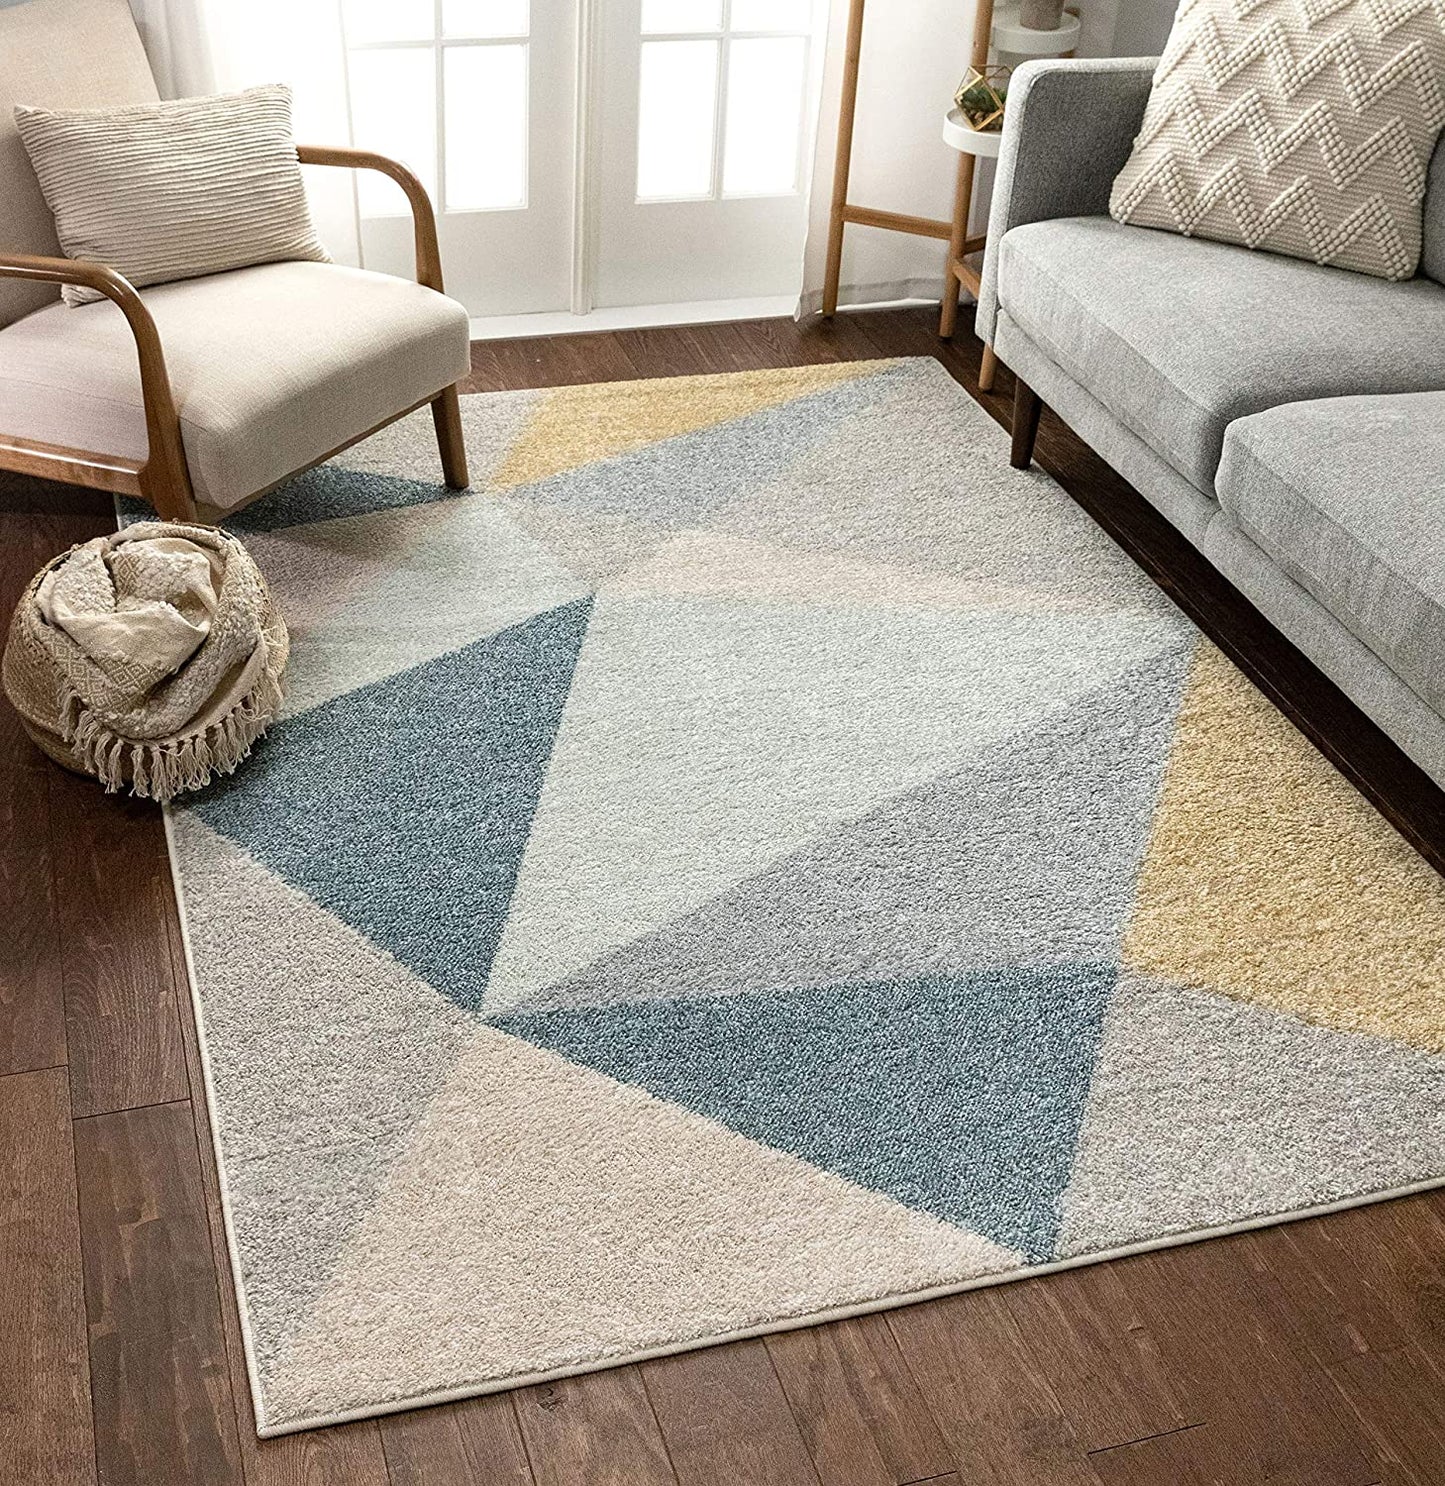 Modern Abstract Triangles Blue Gold Grey Soft Area Rug